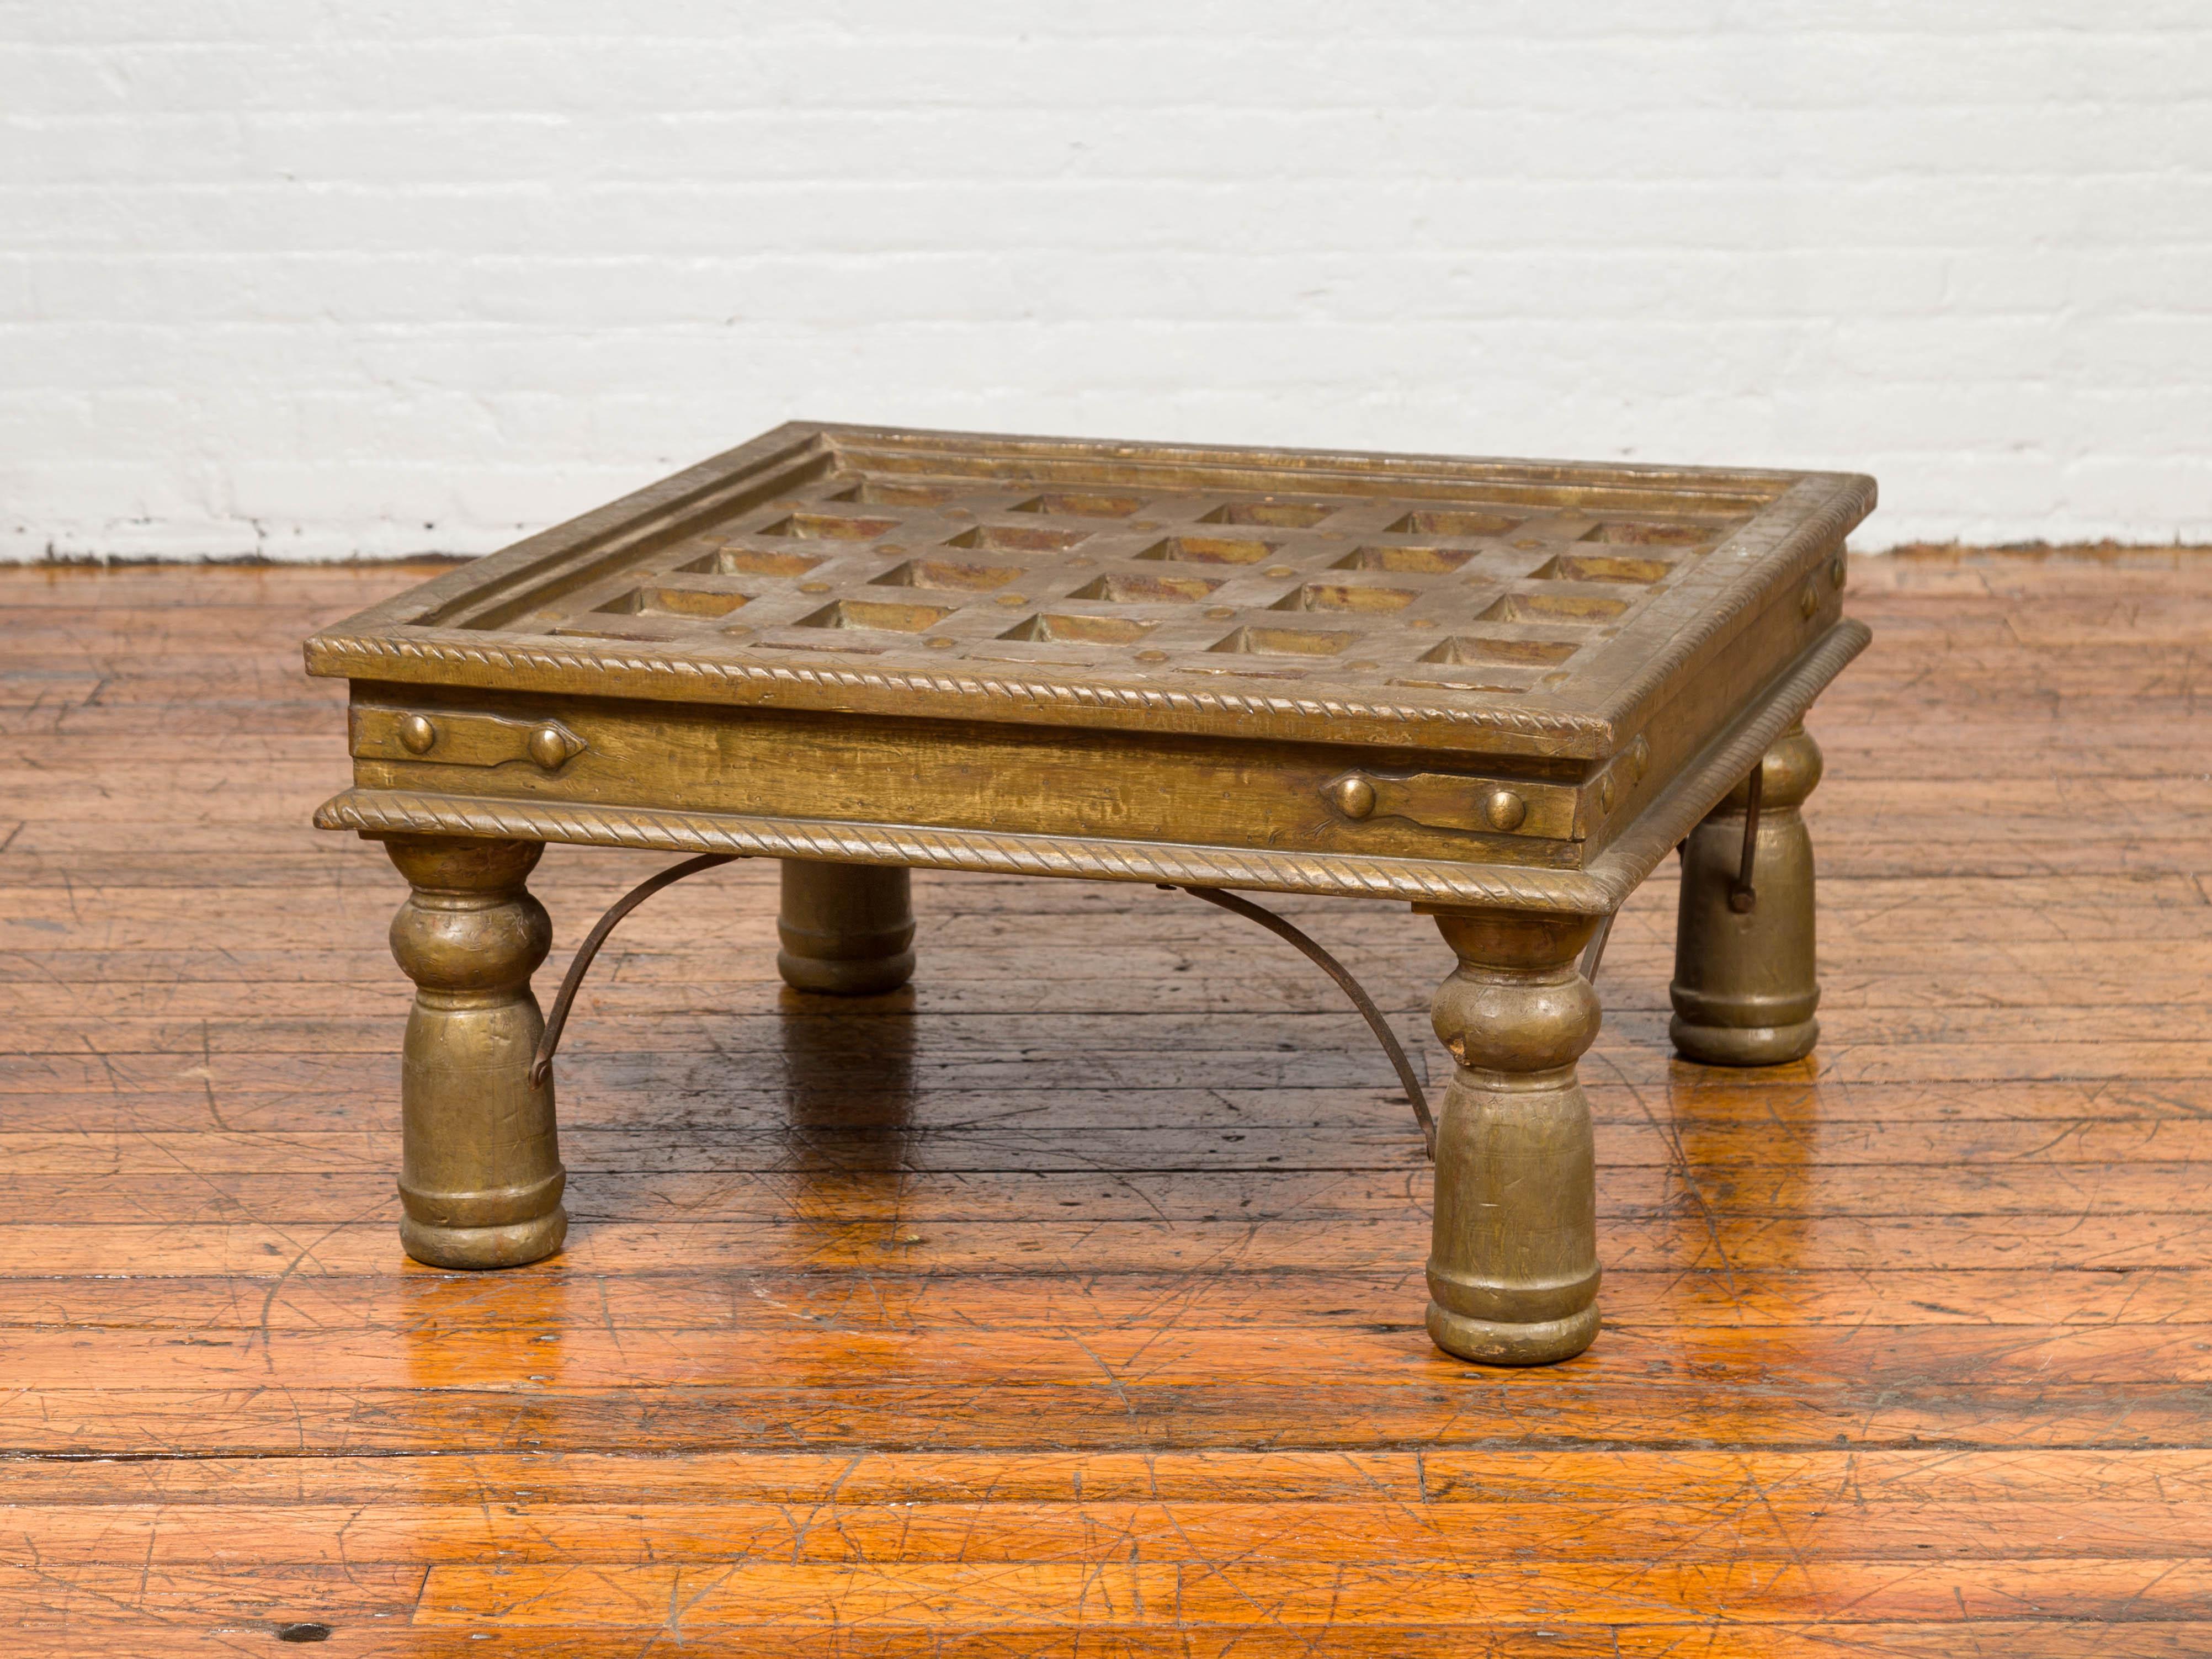 Indian Geometric Top Brass Sheathing Window Grate Made into a Coffee Table For Sale 4